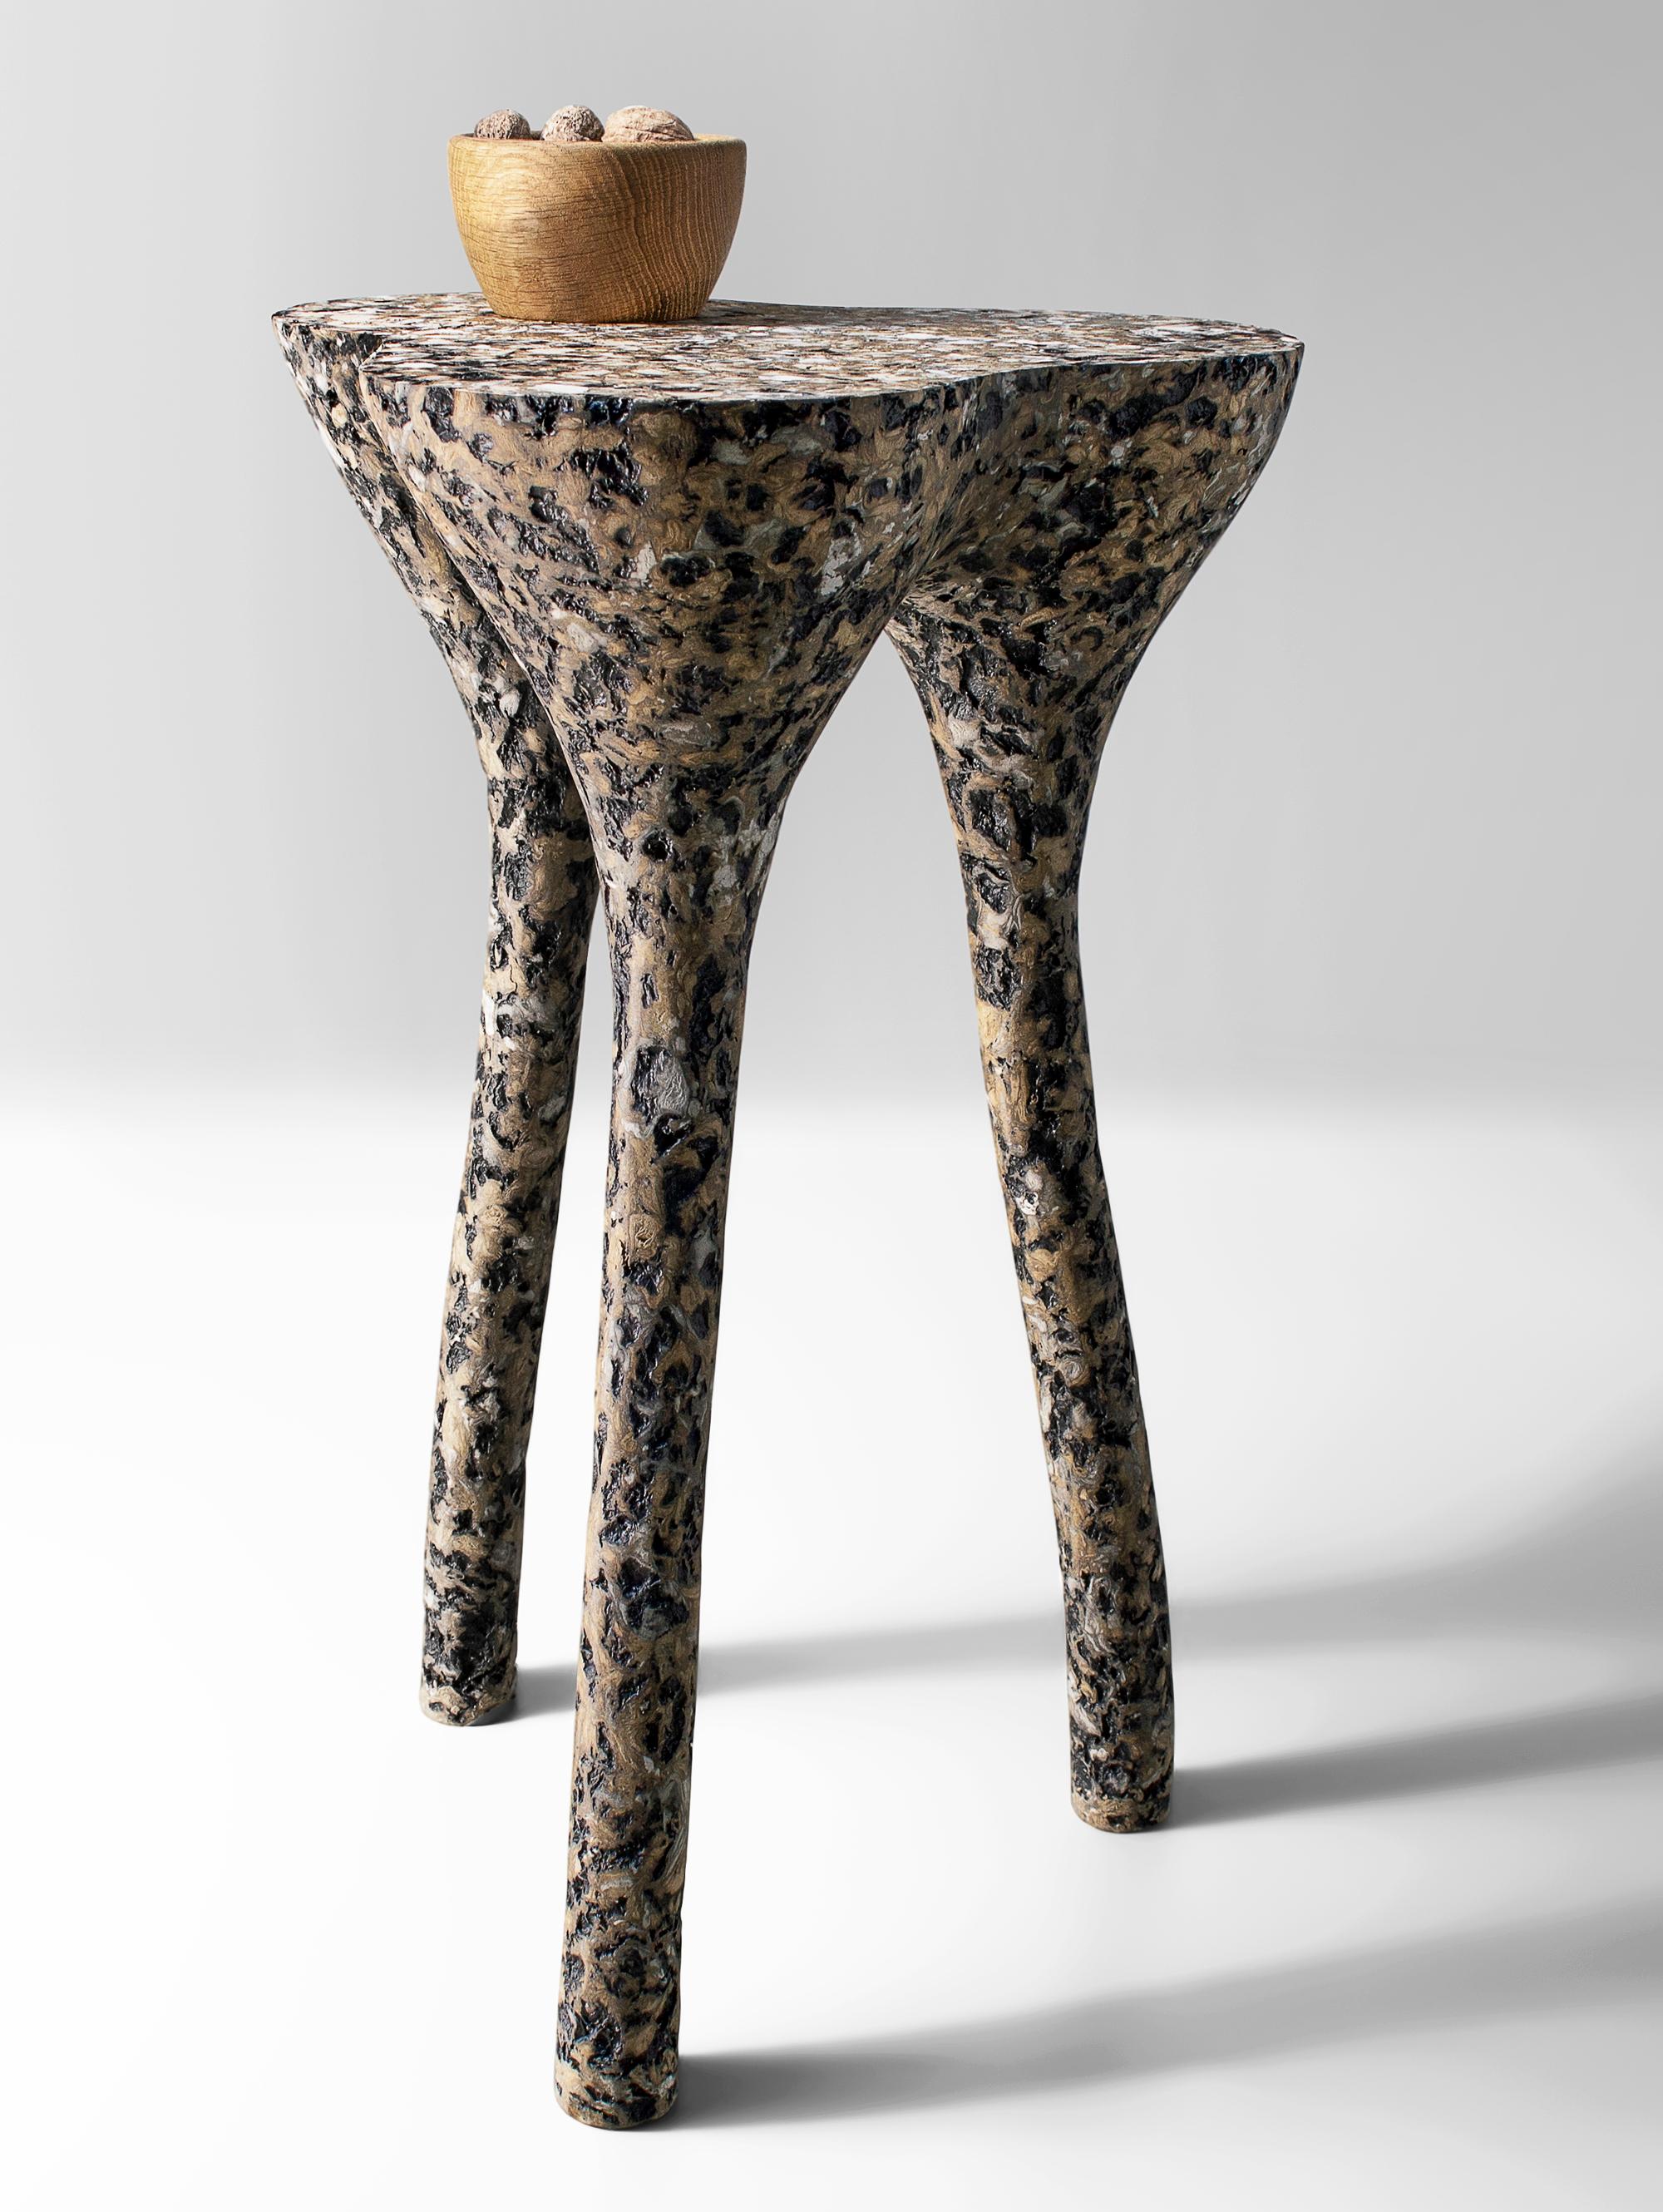 Mottled Tripod Side Table by Kasanai
Dimensions: D 38 x H 65 cm.
Materials: Concrete, recycled cardboard, glue, paint.
6 kg.

The fusion of sturdiness and elegance, along with the blend of archaism and modernity. More than just a surface for placing